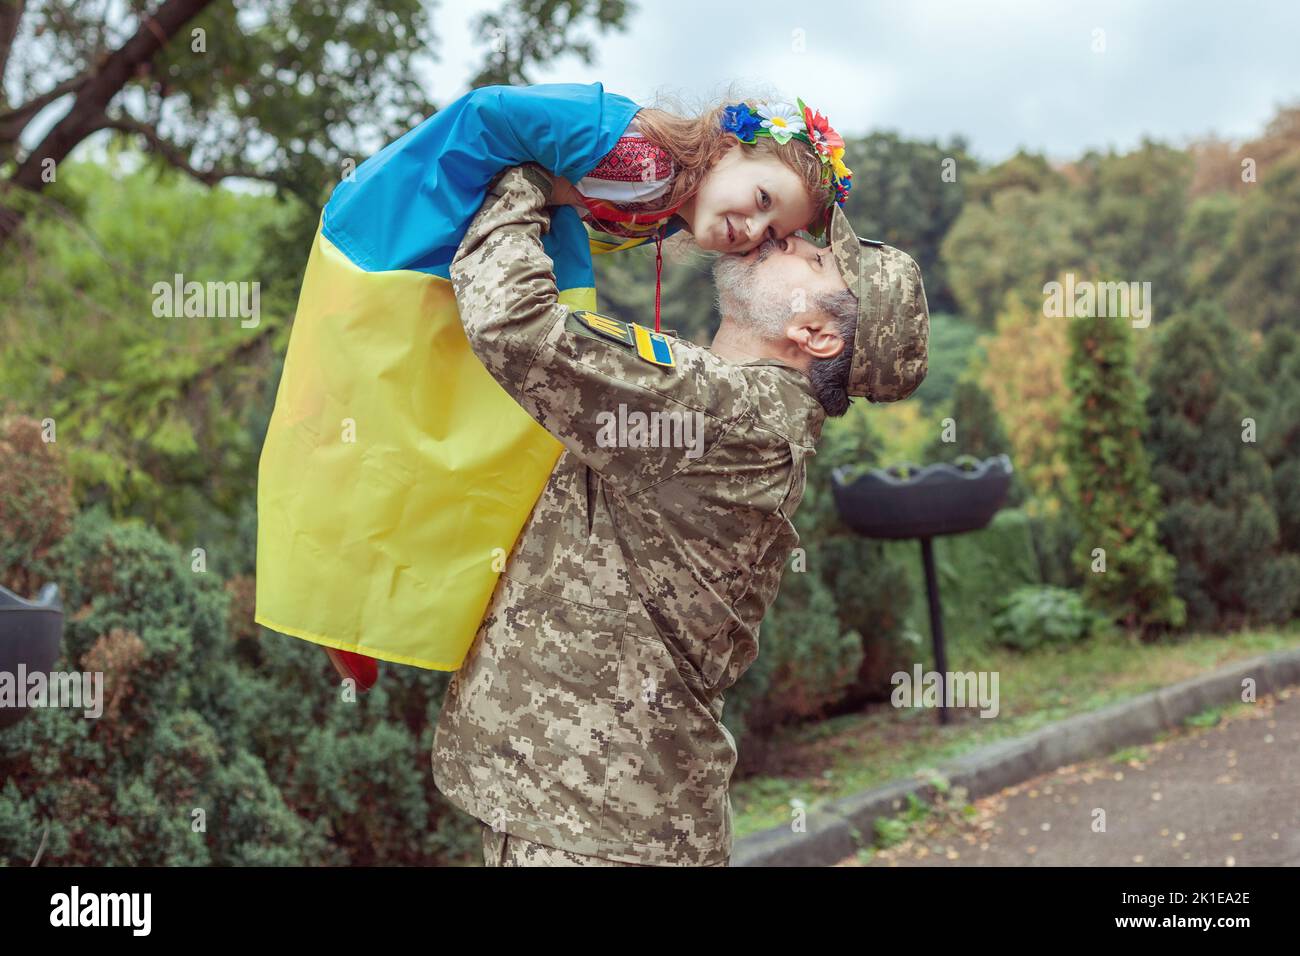 The Ukrainian military is holding his daughter in her arms, she is wrapped in the flag of Ukraine. Stock Photo